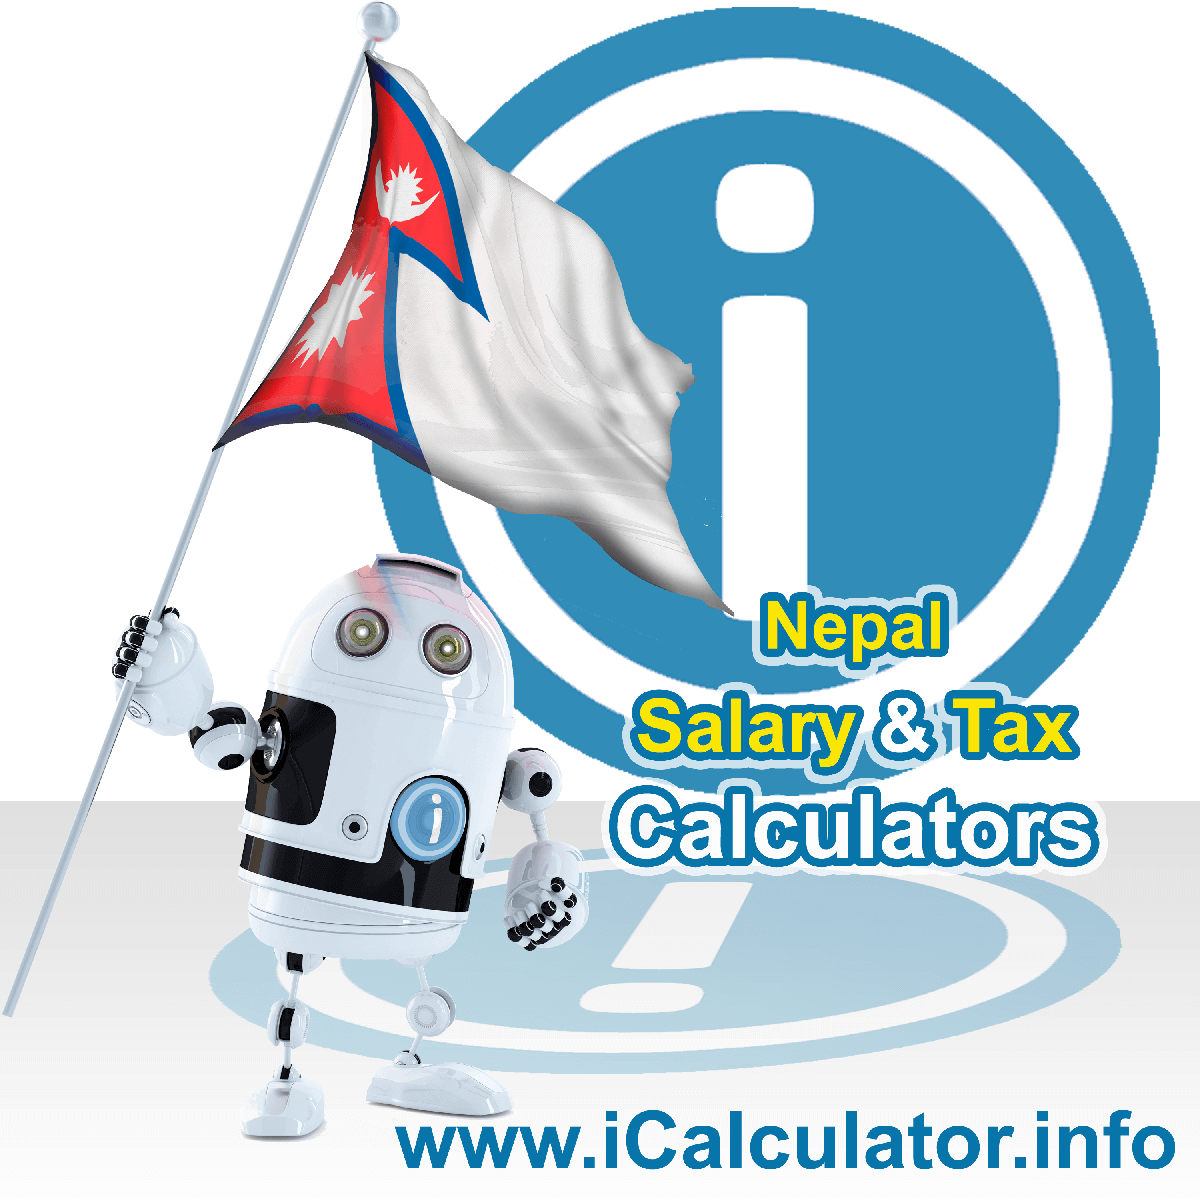 Nepal Salary Calculator. This image shows the Nepalese flag and information relating to the tax formula for the Nepal Tax Calculator